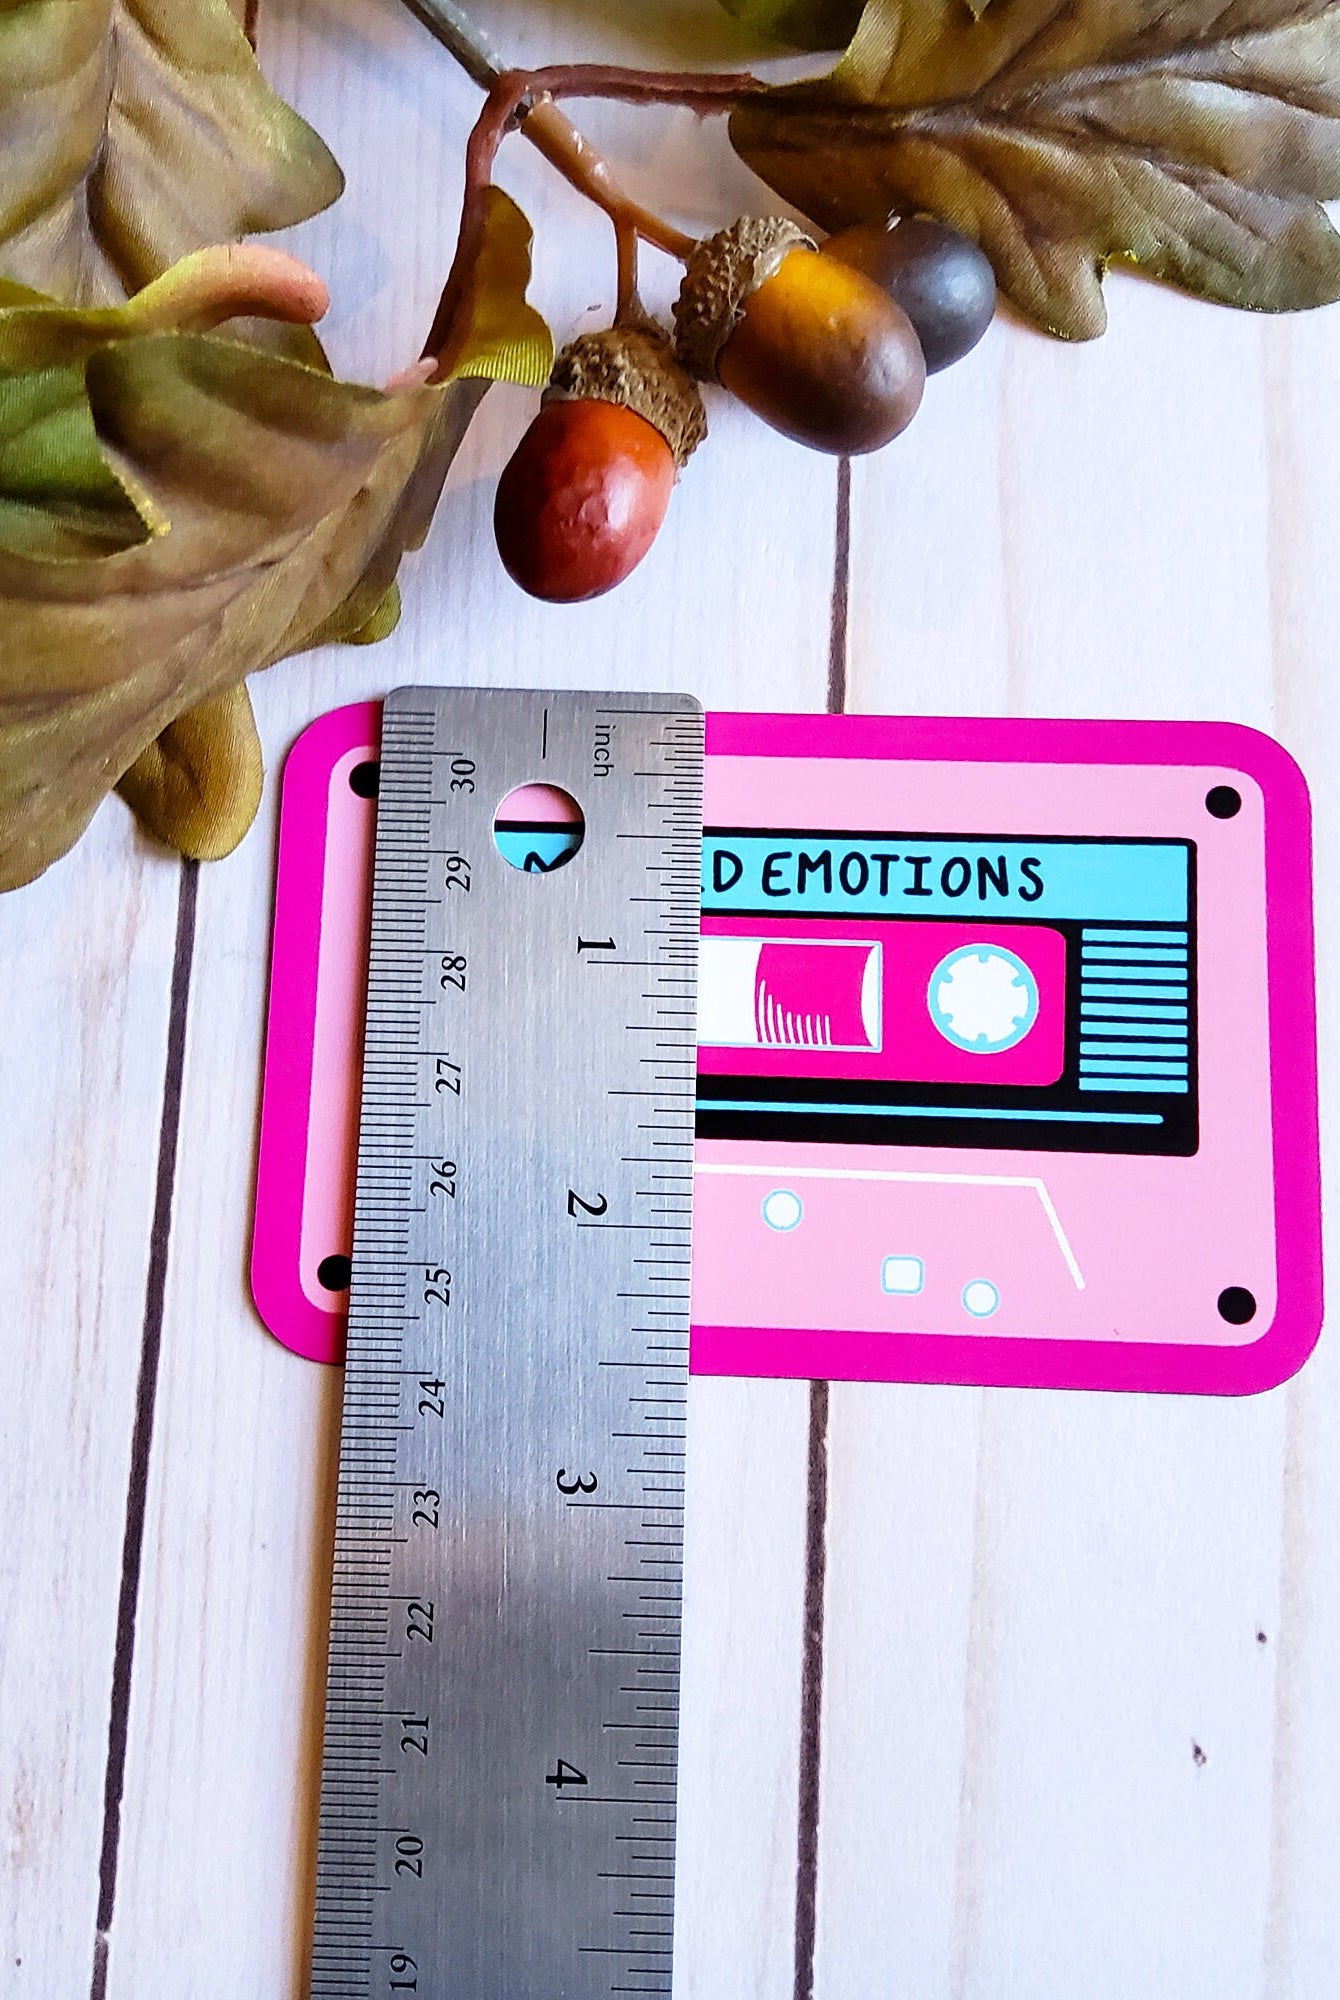 MAGNET: Mixed Emotions Pink 80s Vibes Cassette Tape , Cassette Tape Decorative Magnet , Pink Tape Magnet , Pink Mixed Emotions Magnet